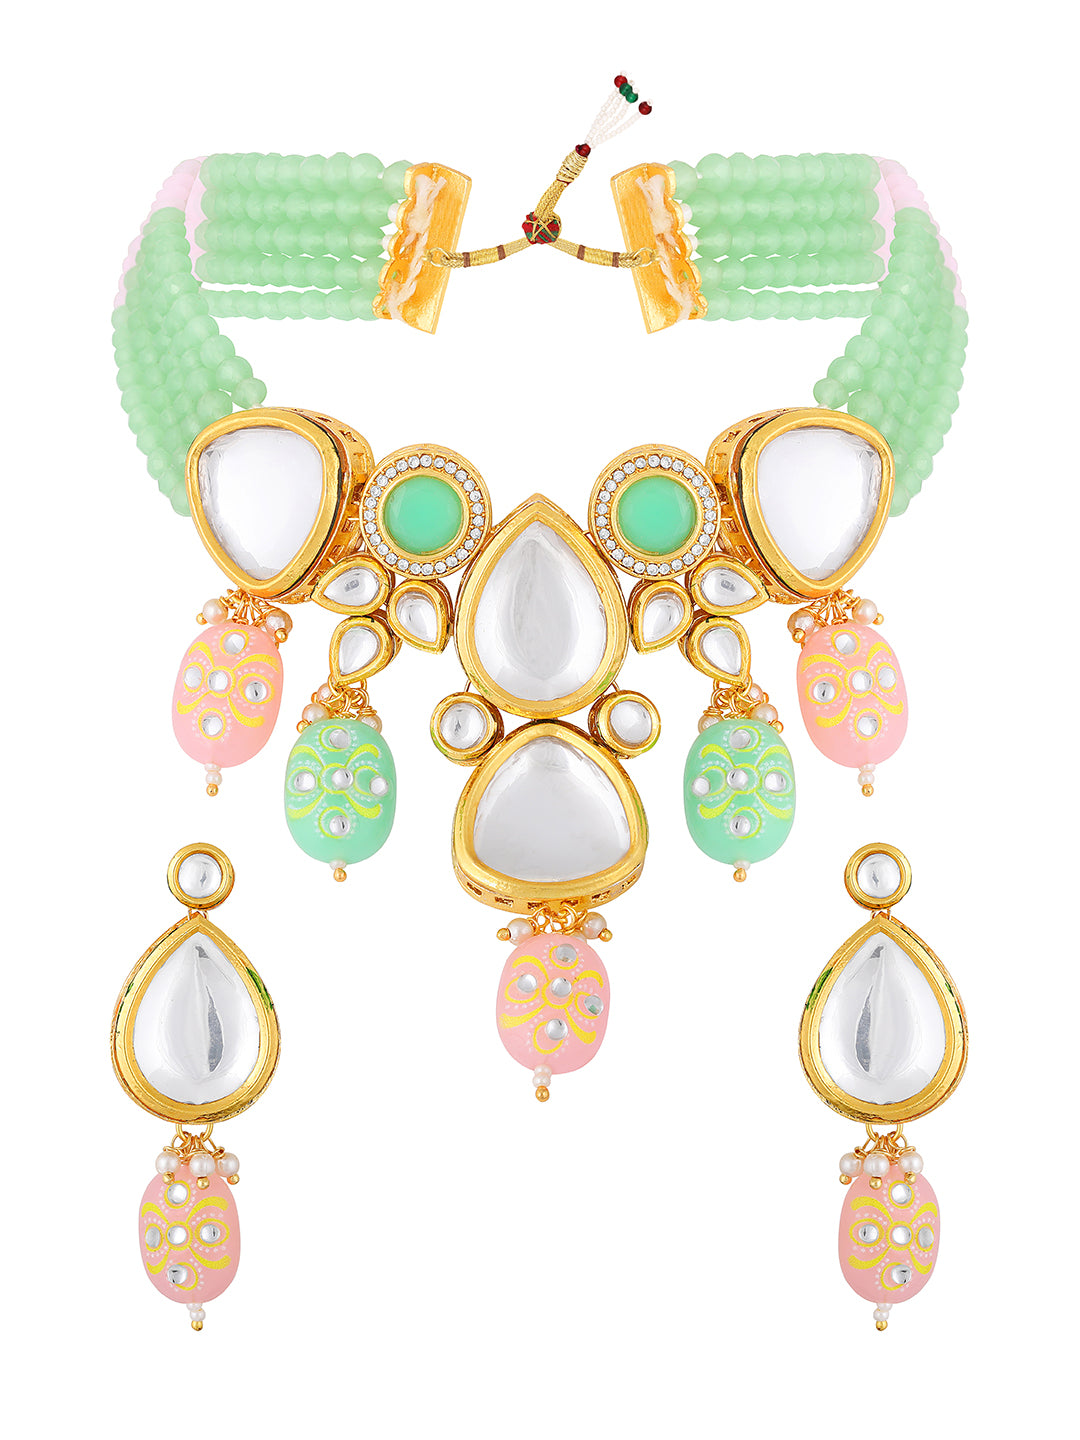 Stunning Multi Coloured Gold Toned Kundan Jewellery Set For Bride To Be